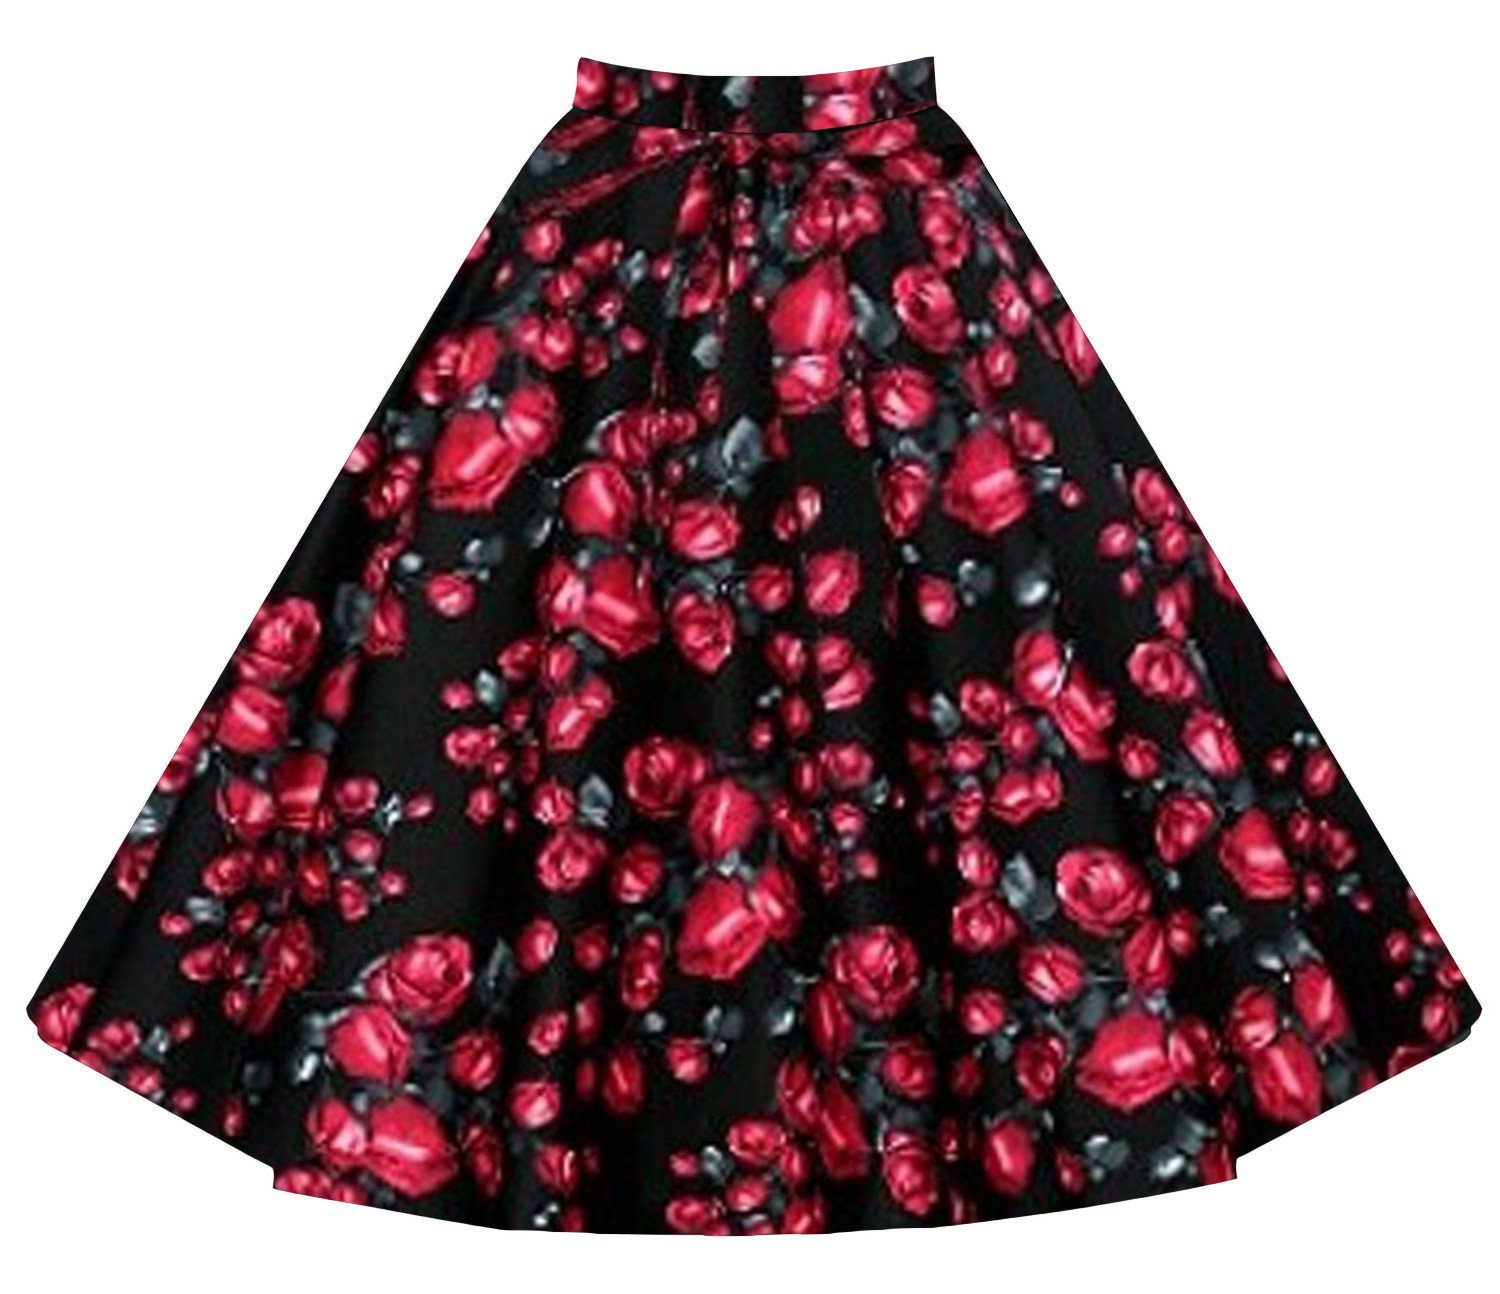 3D Flower Print Flare Ruffled Middle Skirt - Meet Yours Fashion - 6